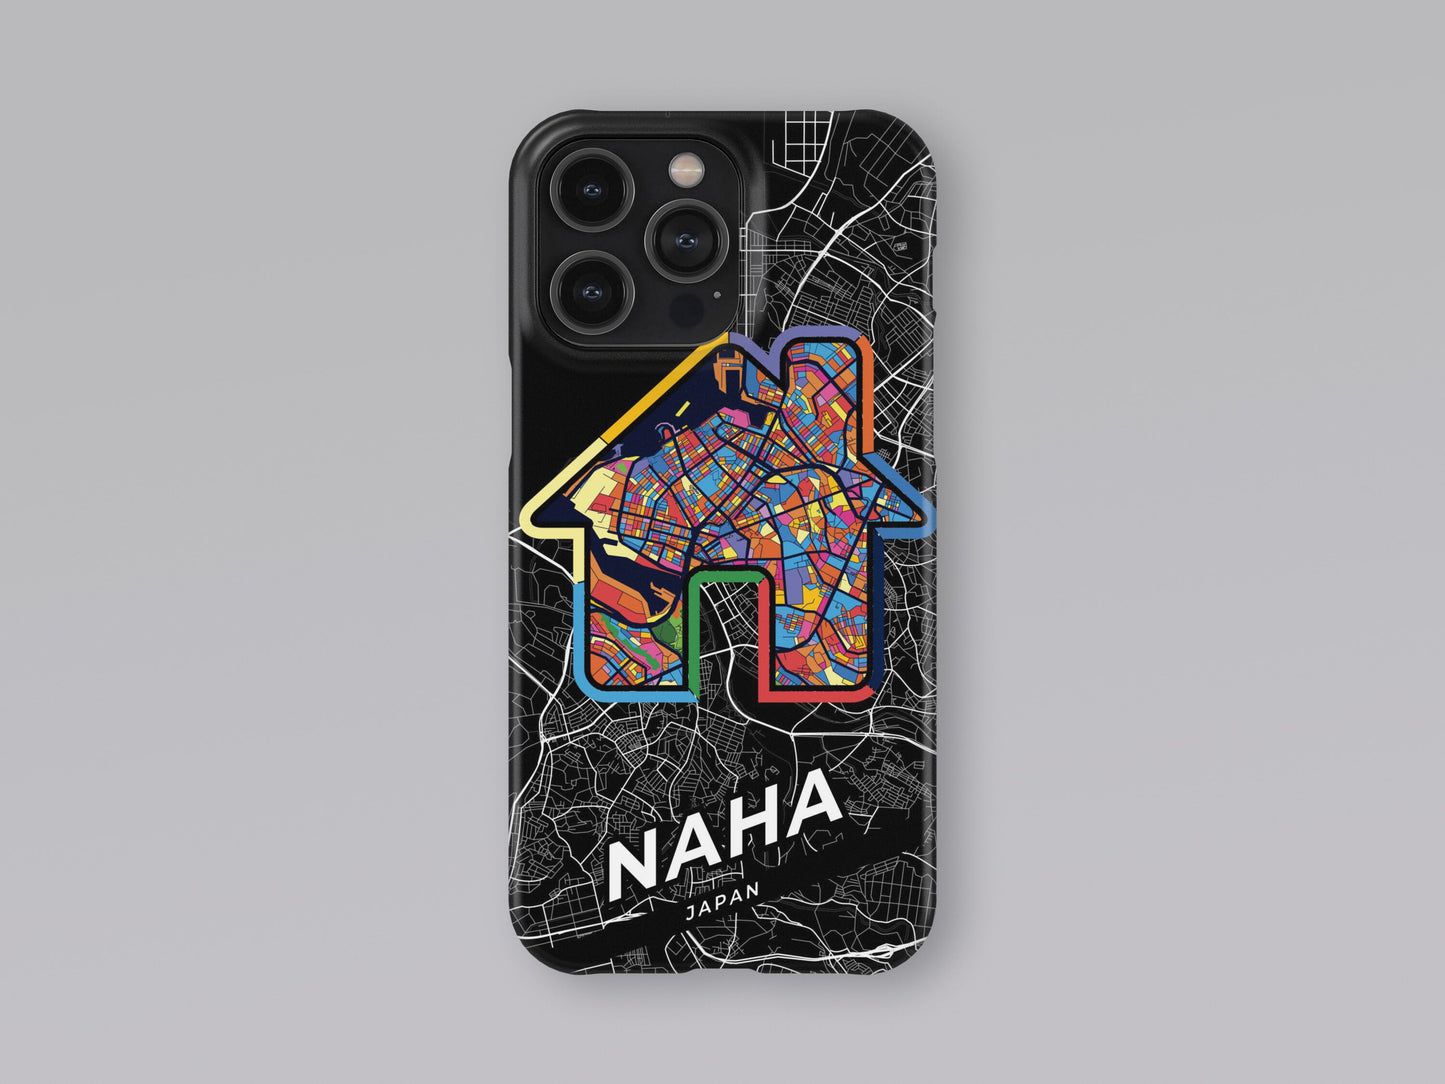 Naha Japan slim phone case with colorful icon 3